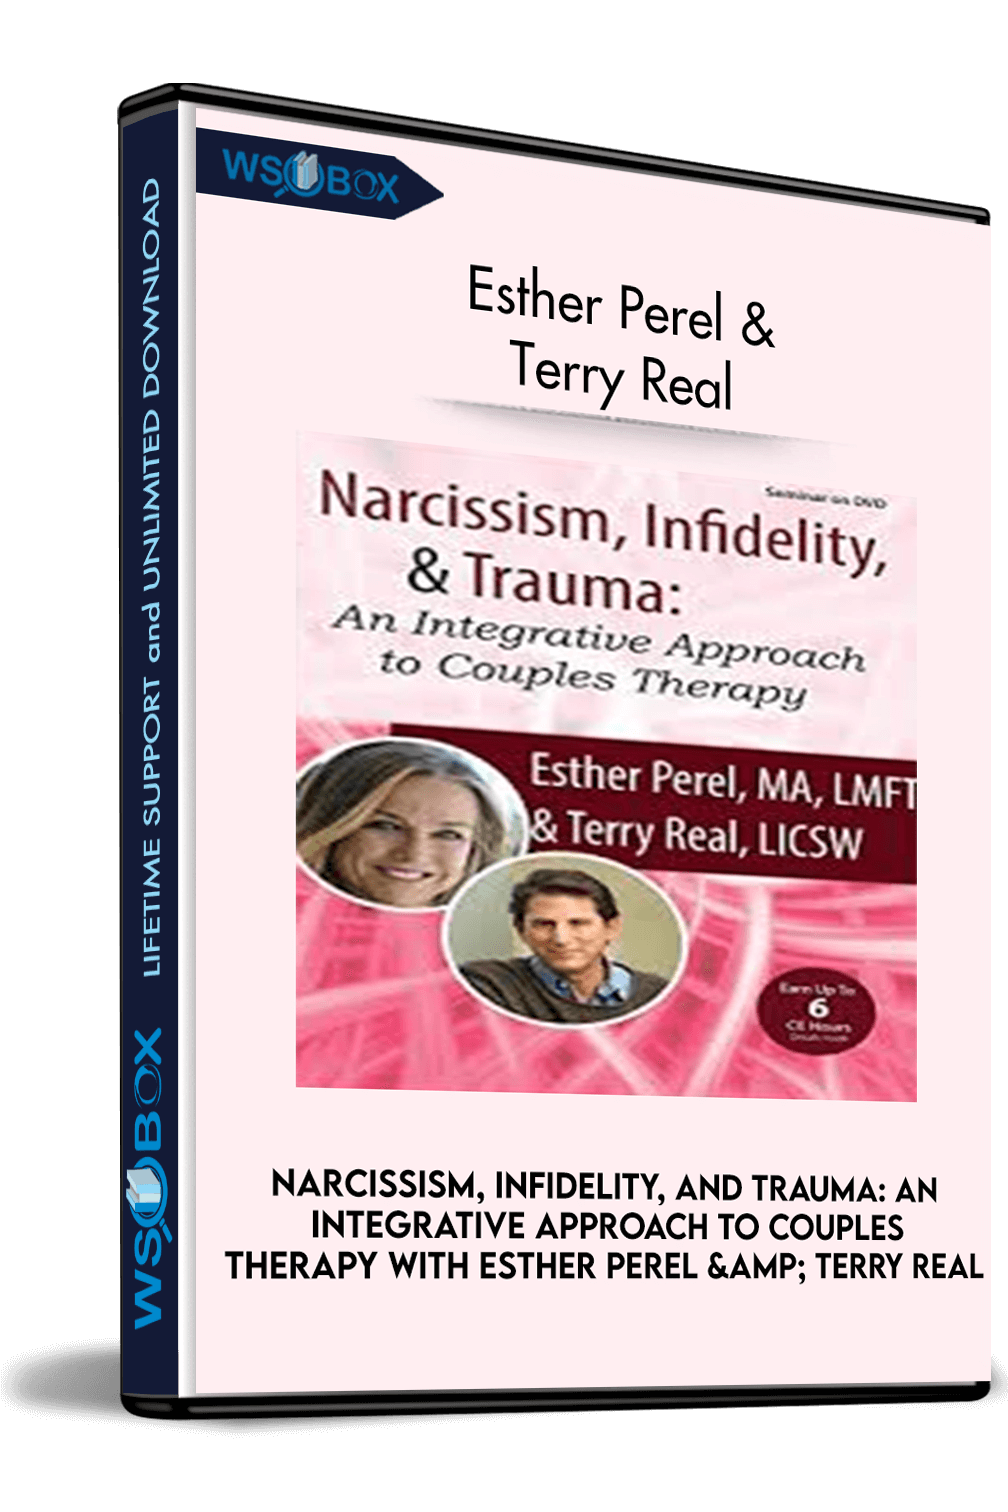 narcissism-infidelity-and-trauma-an-integrative-approach-to-couples-therapy-with-esther-perel-terry-real-esther-perel-terry-real